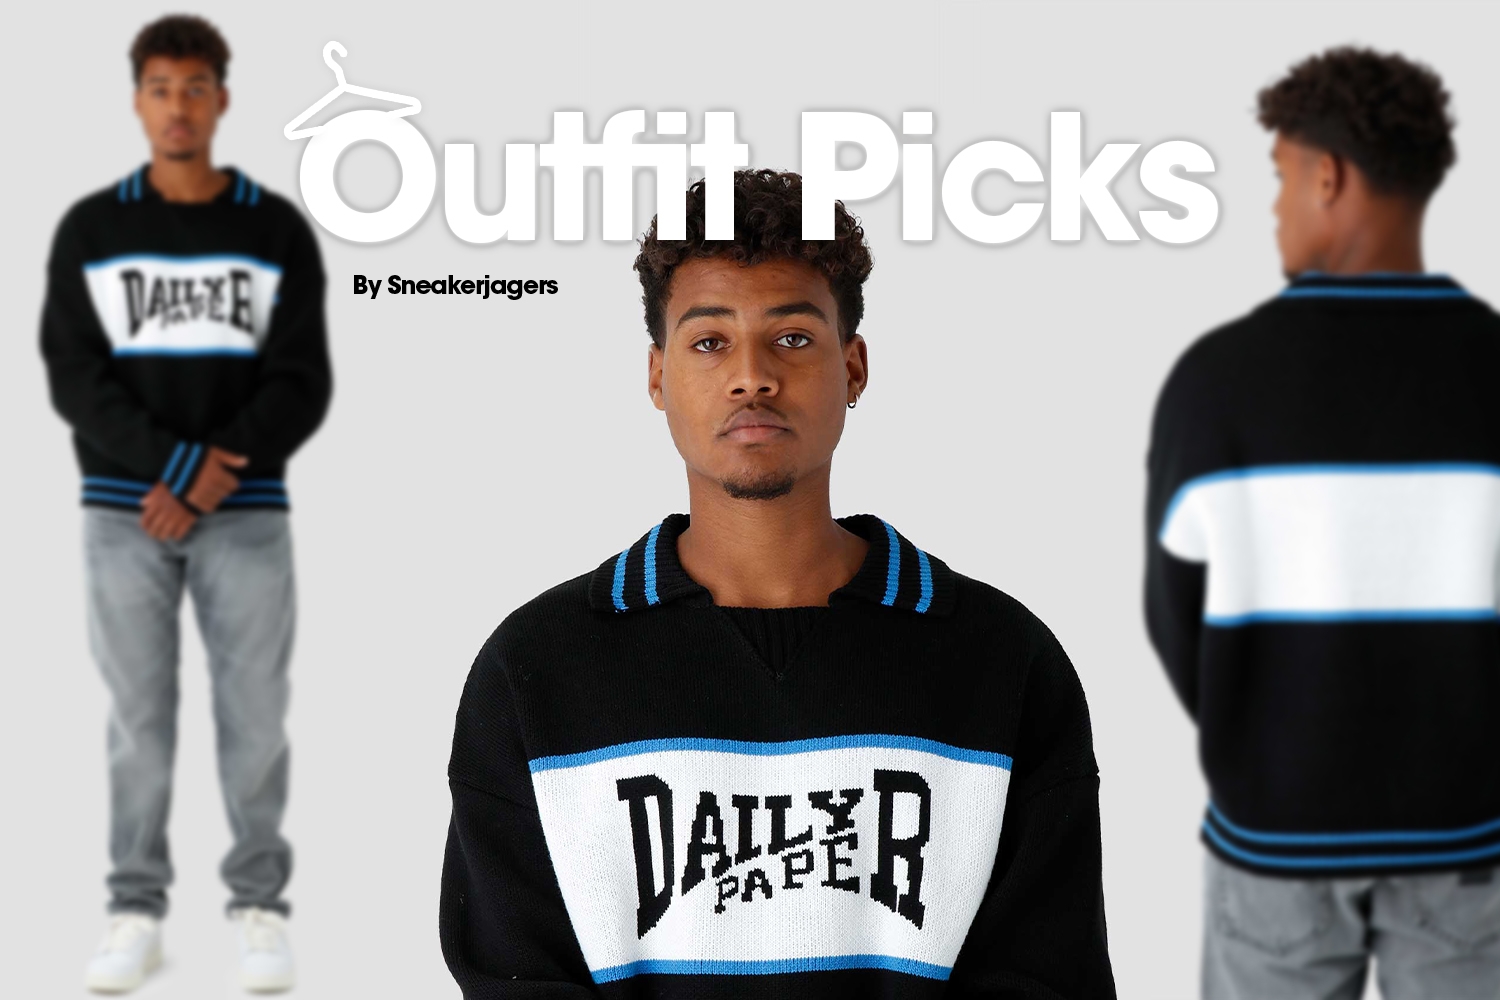 Outfit Picks by Sneakerjagers - Woche 36